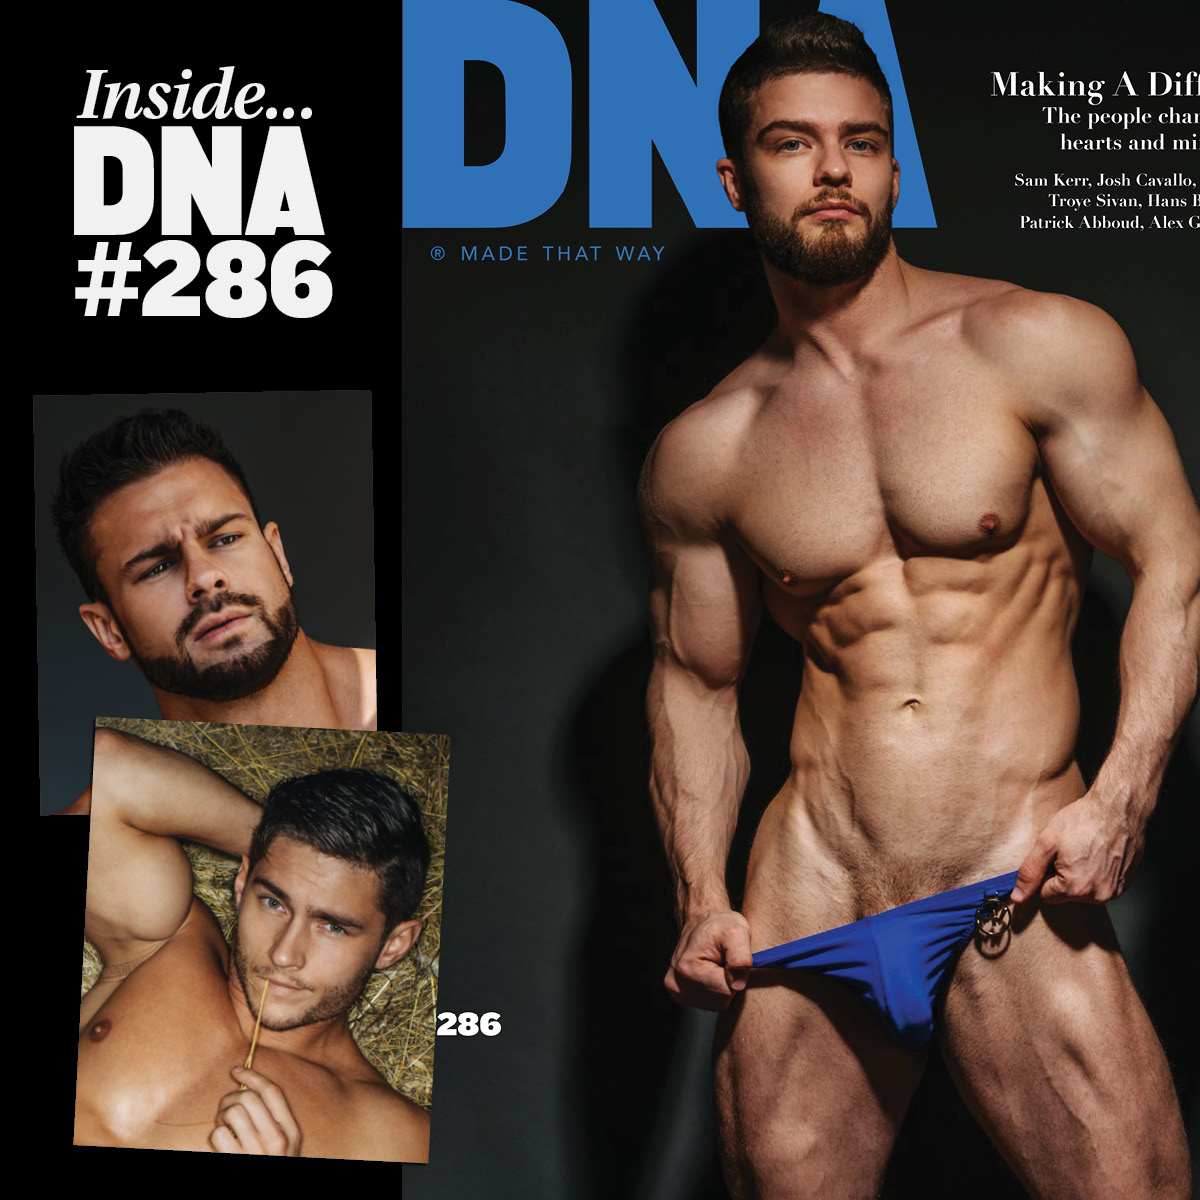 DNA #286 – Making A Difference is all about the change-makers of today! Find @YTransformator by @sergeleephoto on the cover with @LilNasX, @troyesivan, @samkerr1, @JoshuaCavallo, @PatrickAbboud, @HansBerlinxxx, @AlexGreenwich + more 👉 dnam.ag/DNA286